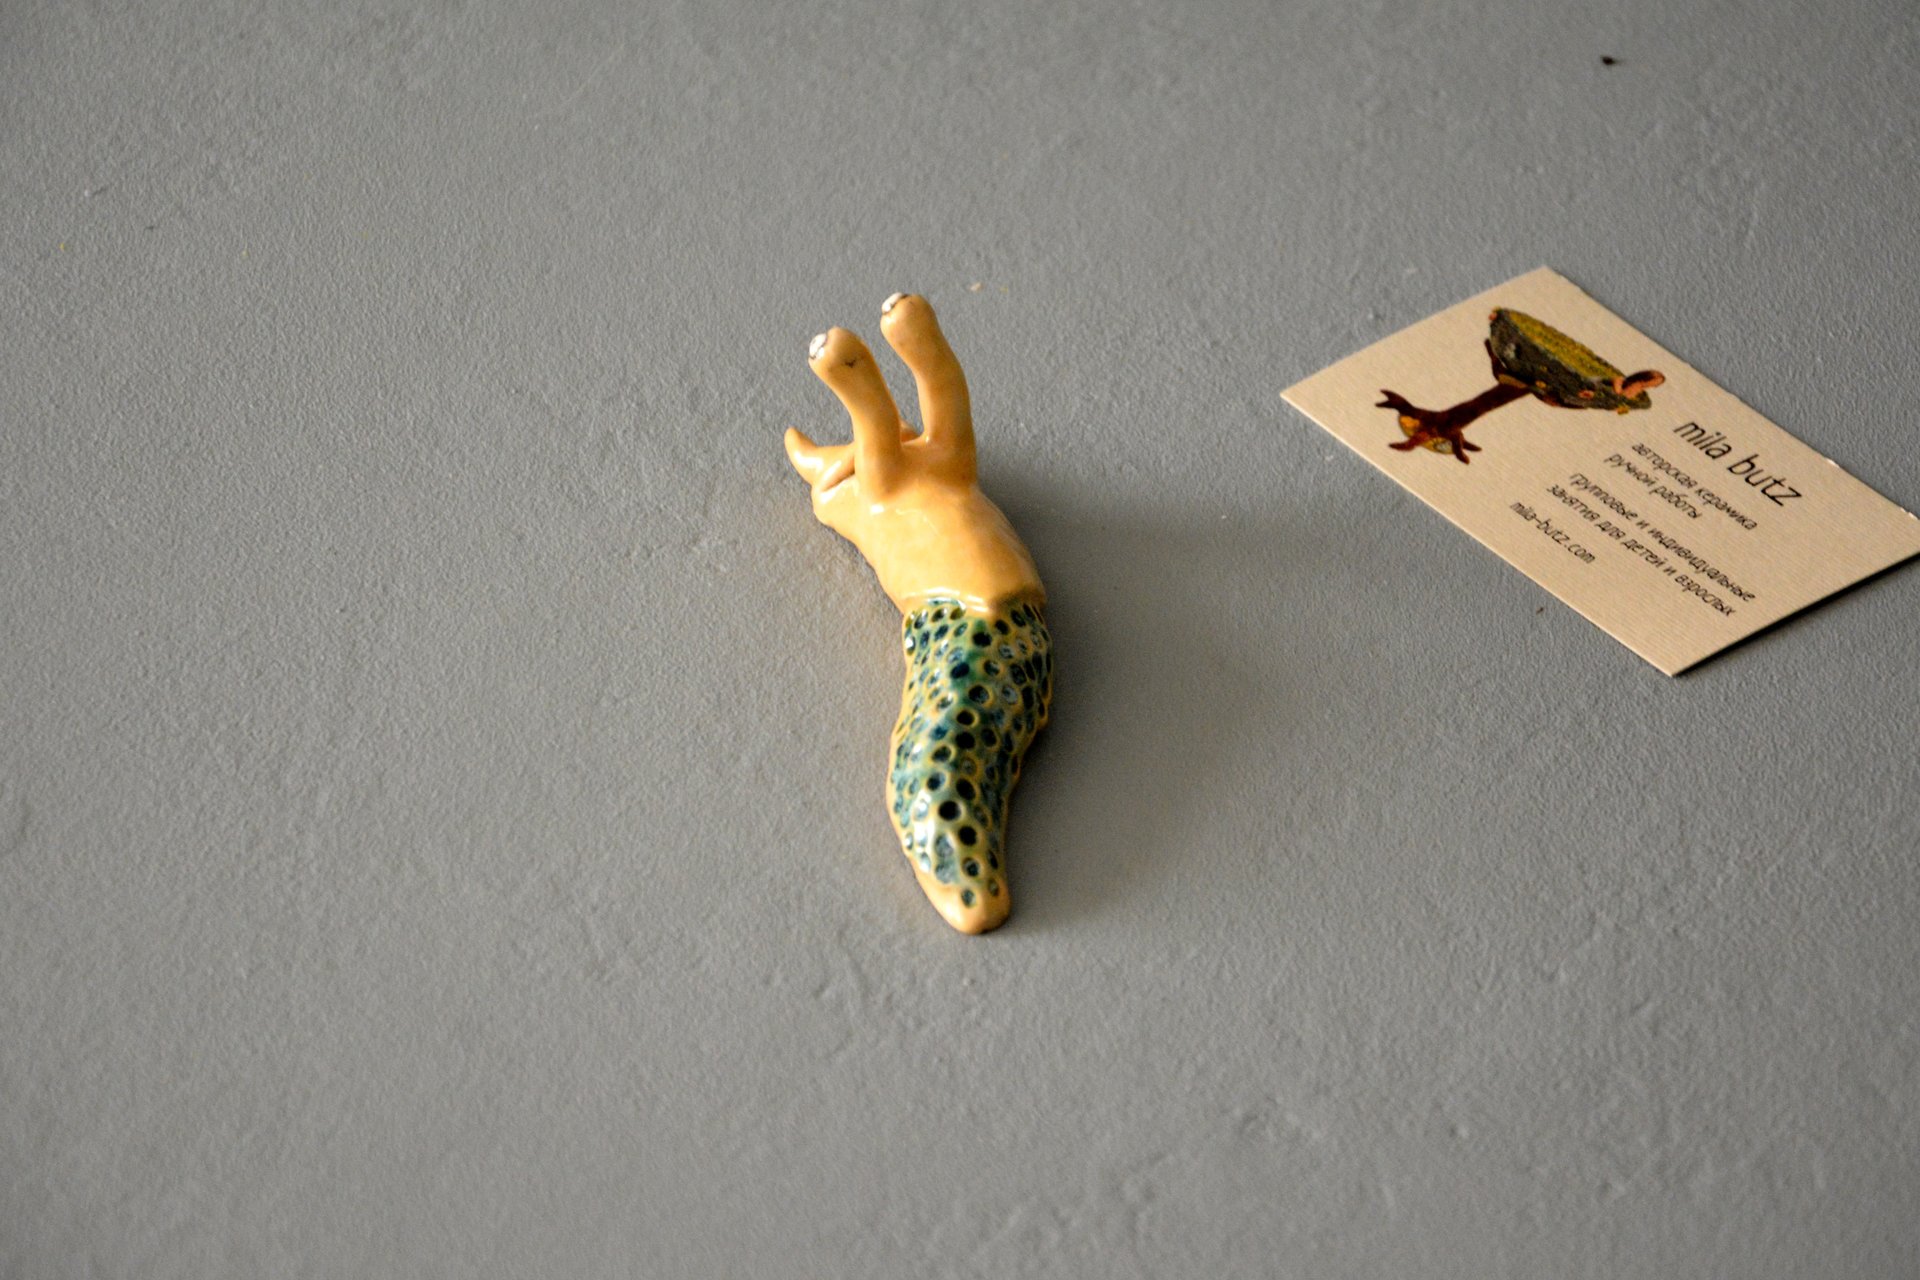 Figurine of a Cochlea without a house, height - 1.5 cm, photo 4 of 5.